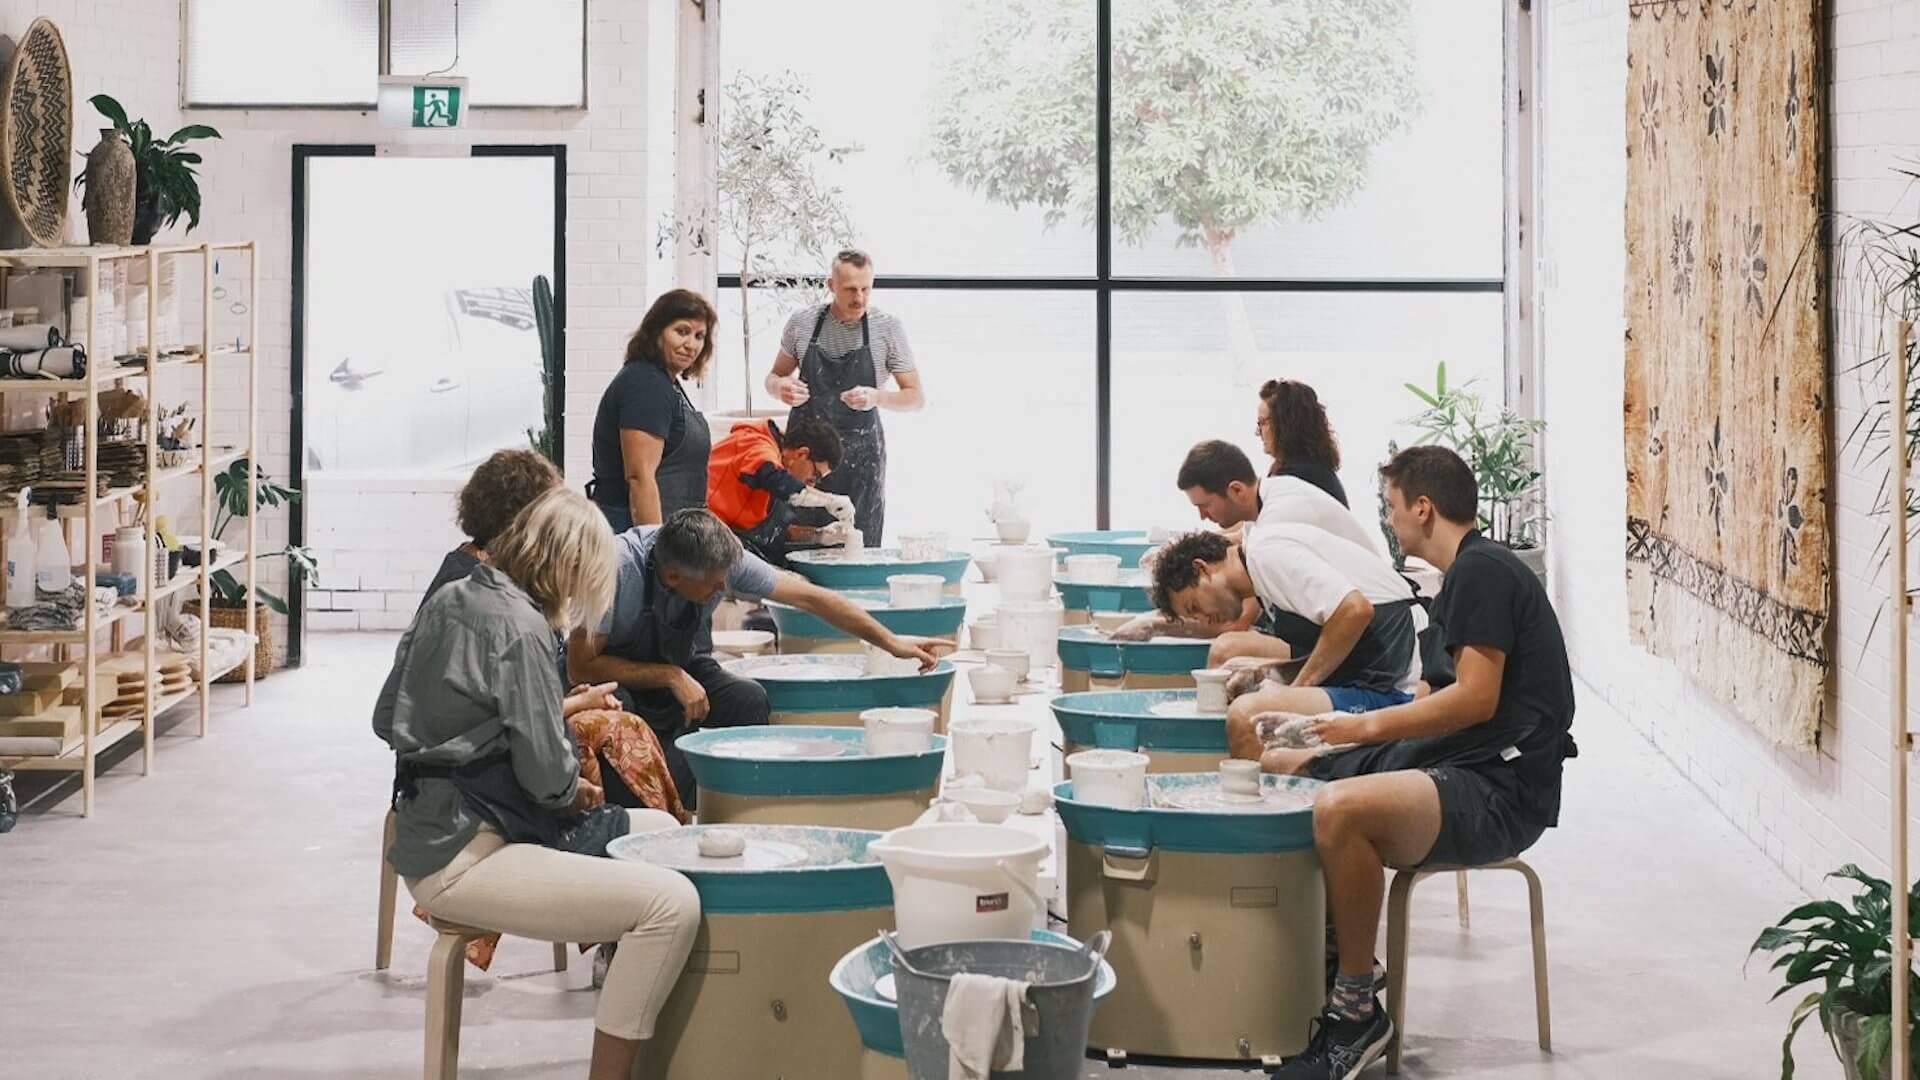 The Wheelhouse Ceramic Studio - home to some of the best pottery classes in Melbourne.